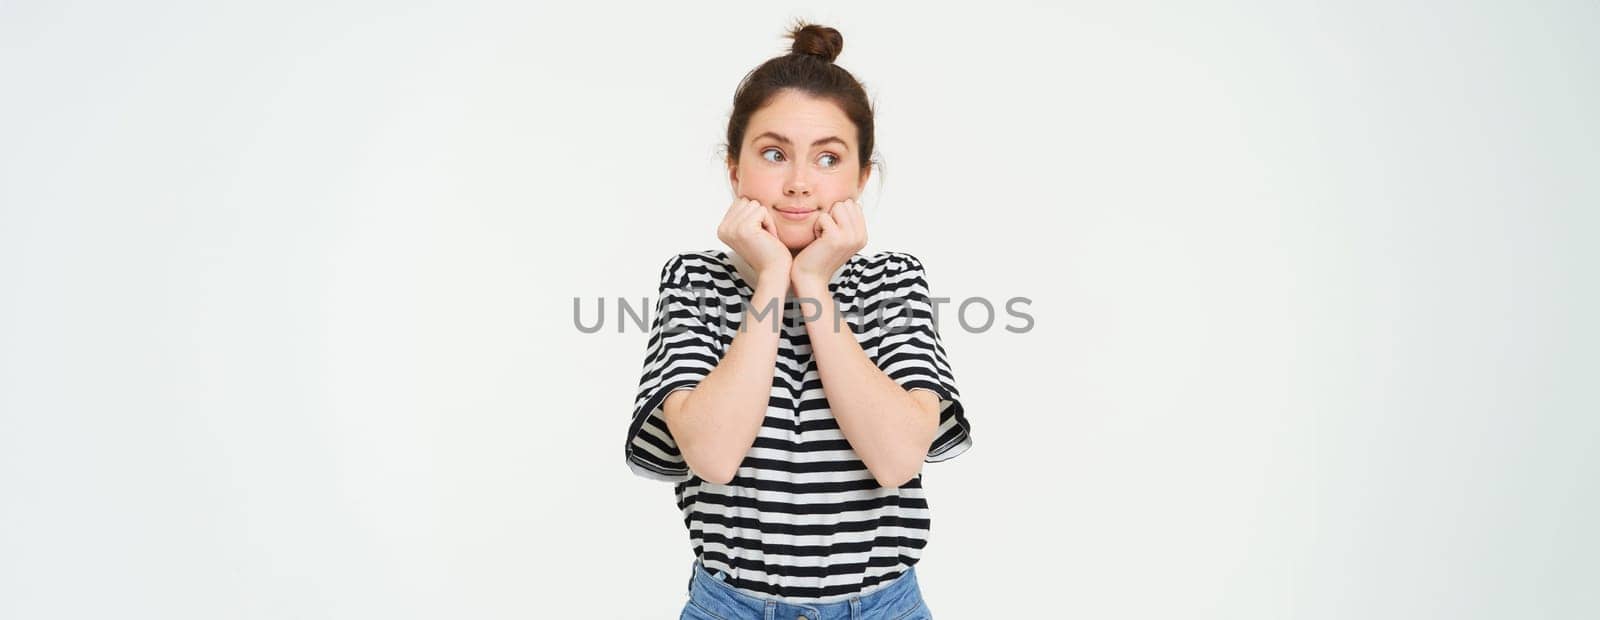 Wellbeing and women concept. Portrait of young woman with cute face, holds hands near head and smiles, isolated against white background.